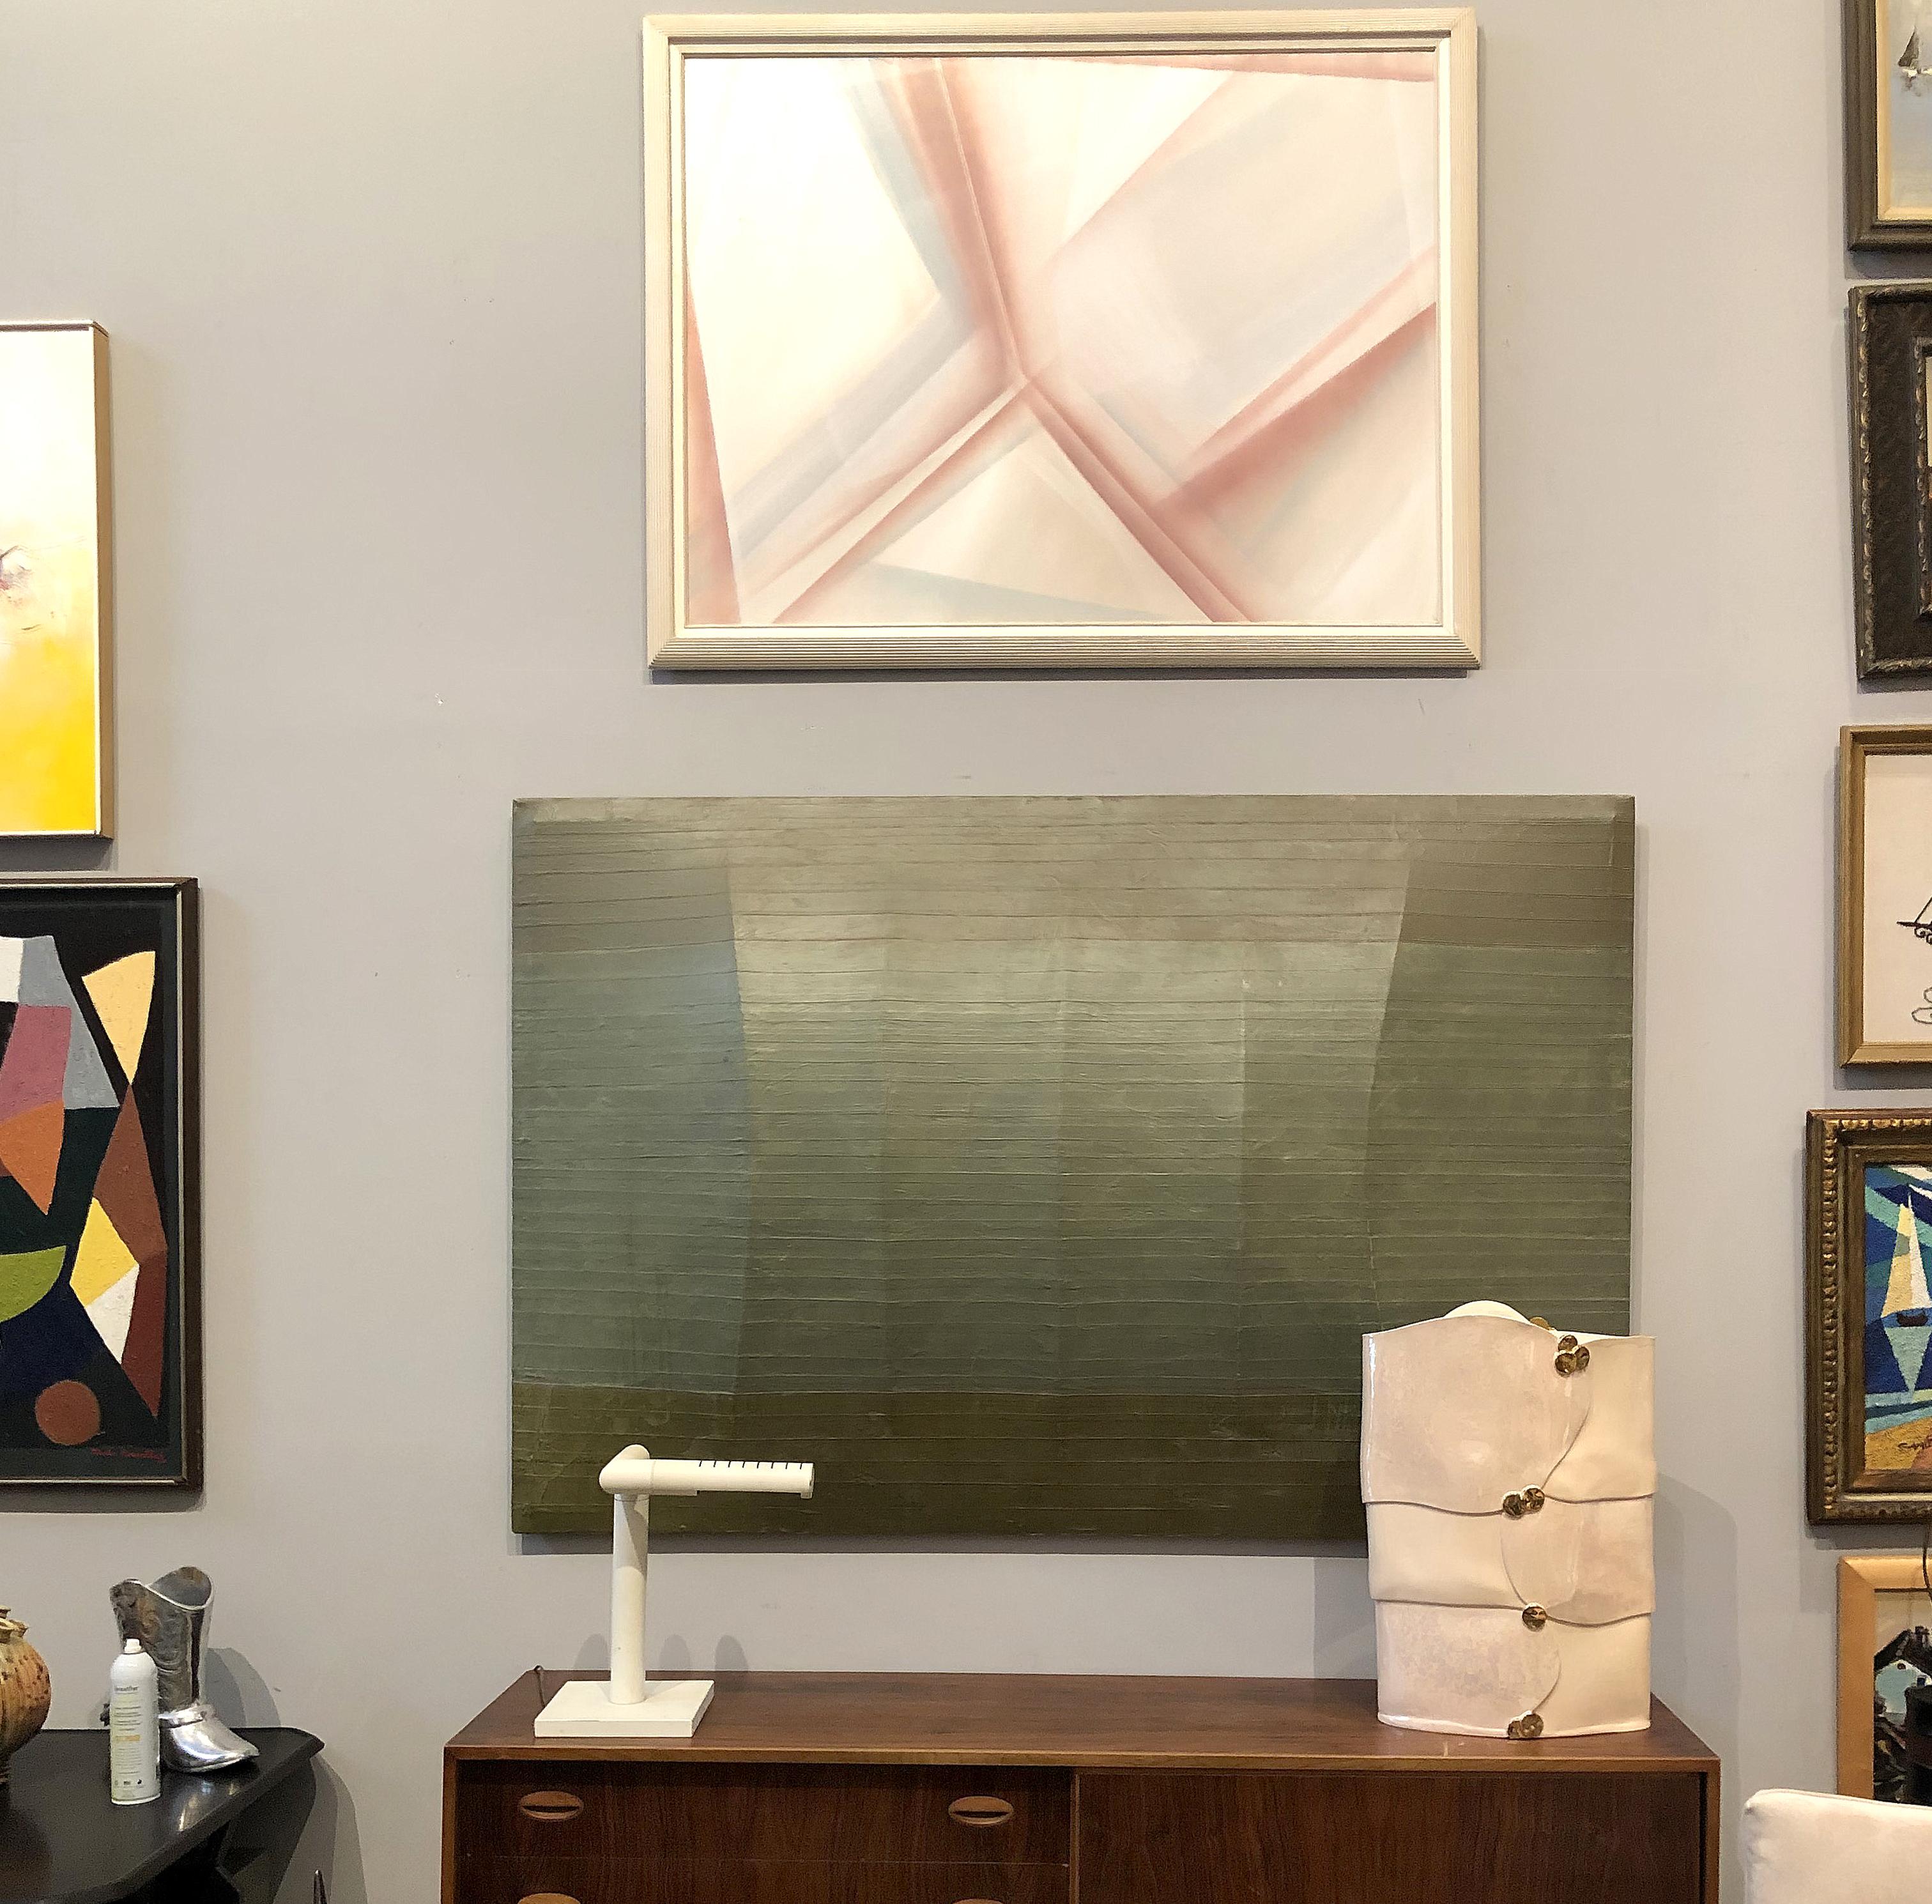 3-Dimensional painting attributed to Charles Hinman

Offered for sale is a monumental 1960s three dimensional painting attributed to Charles Hinman (American b. 1932). This impressive mix-media painting was created with exceptional